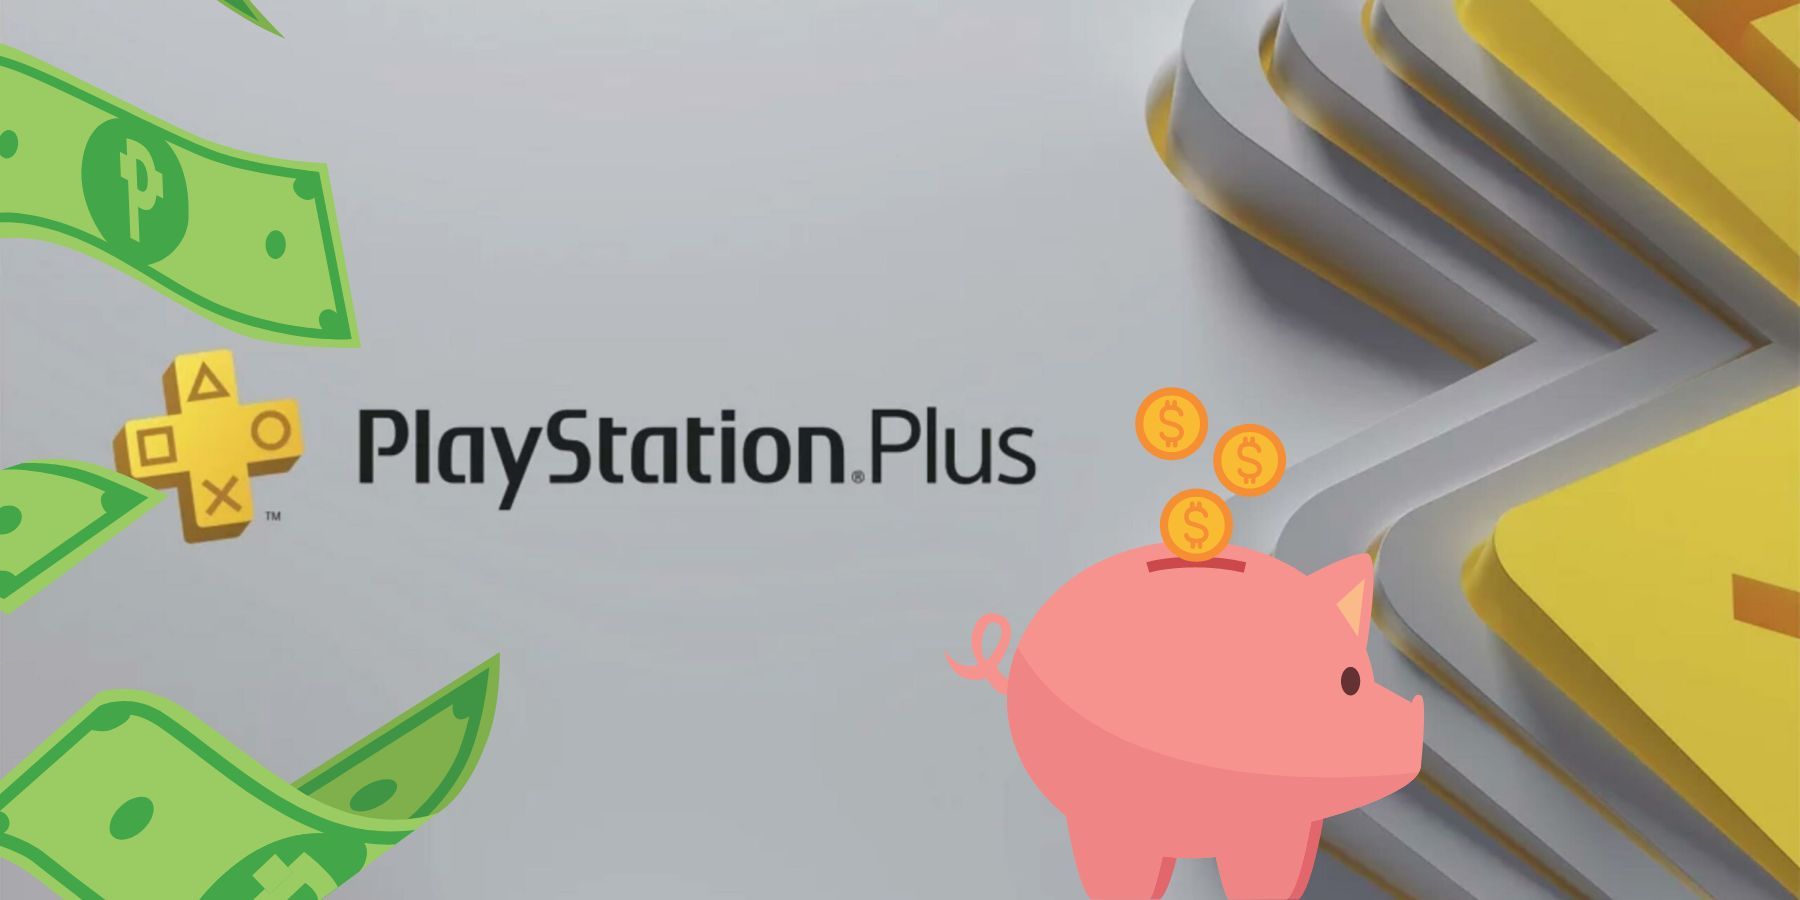 PS Plus - Comparison of subscriptions: benefits, content and price